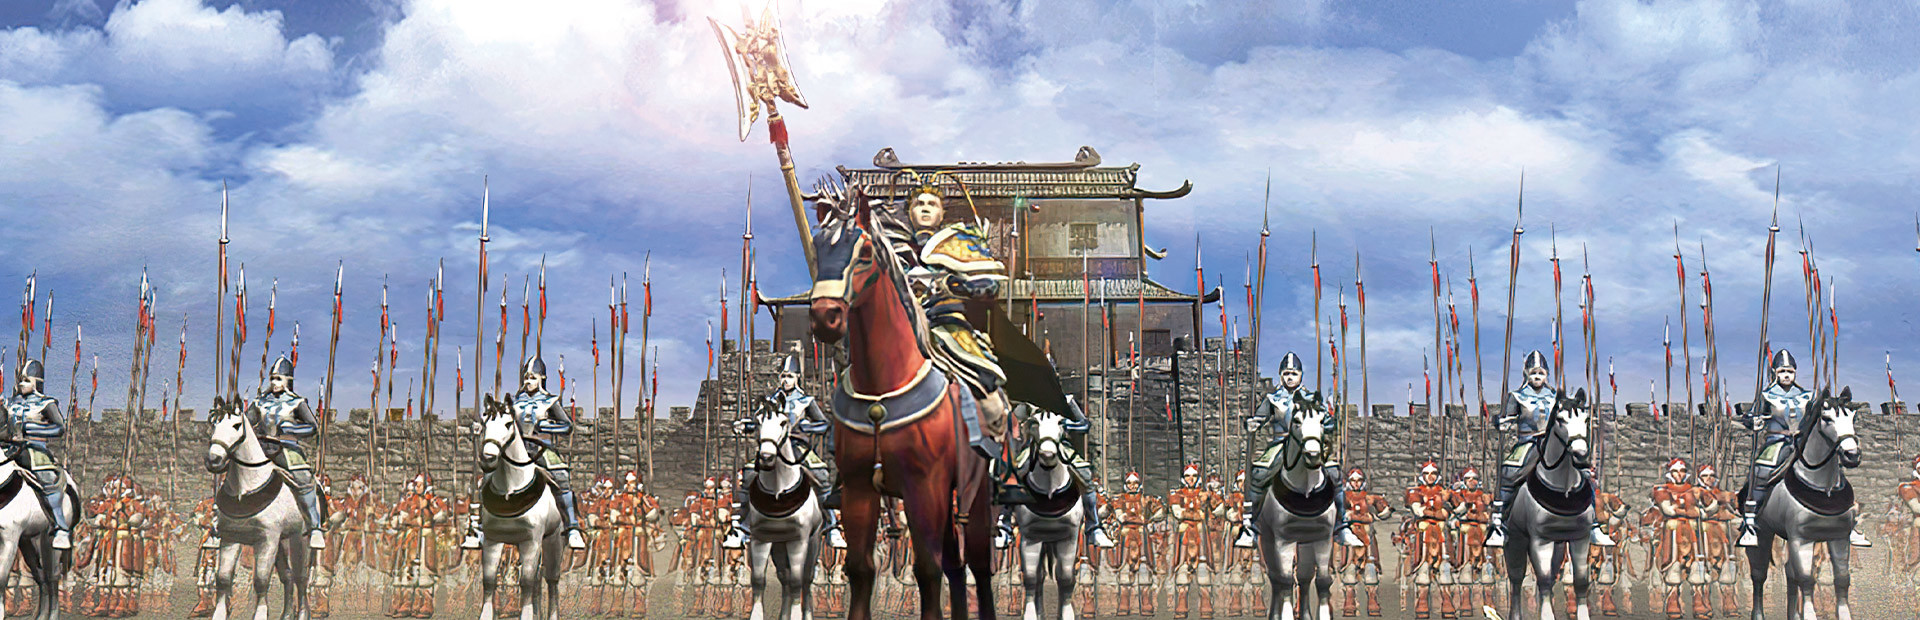 Heroes of the Three Kingdoms 4 cover image